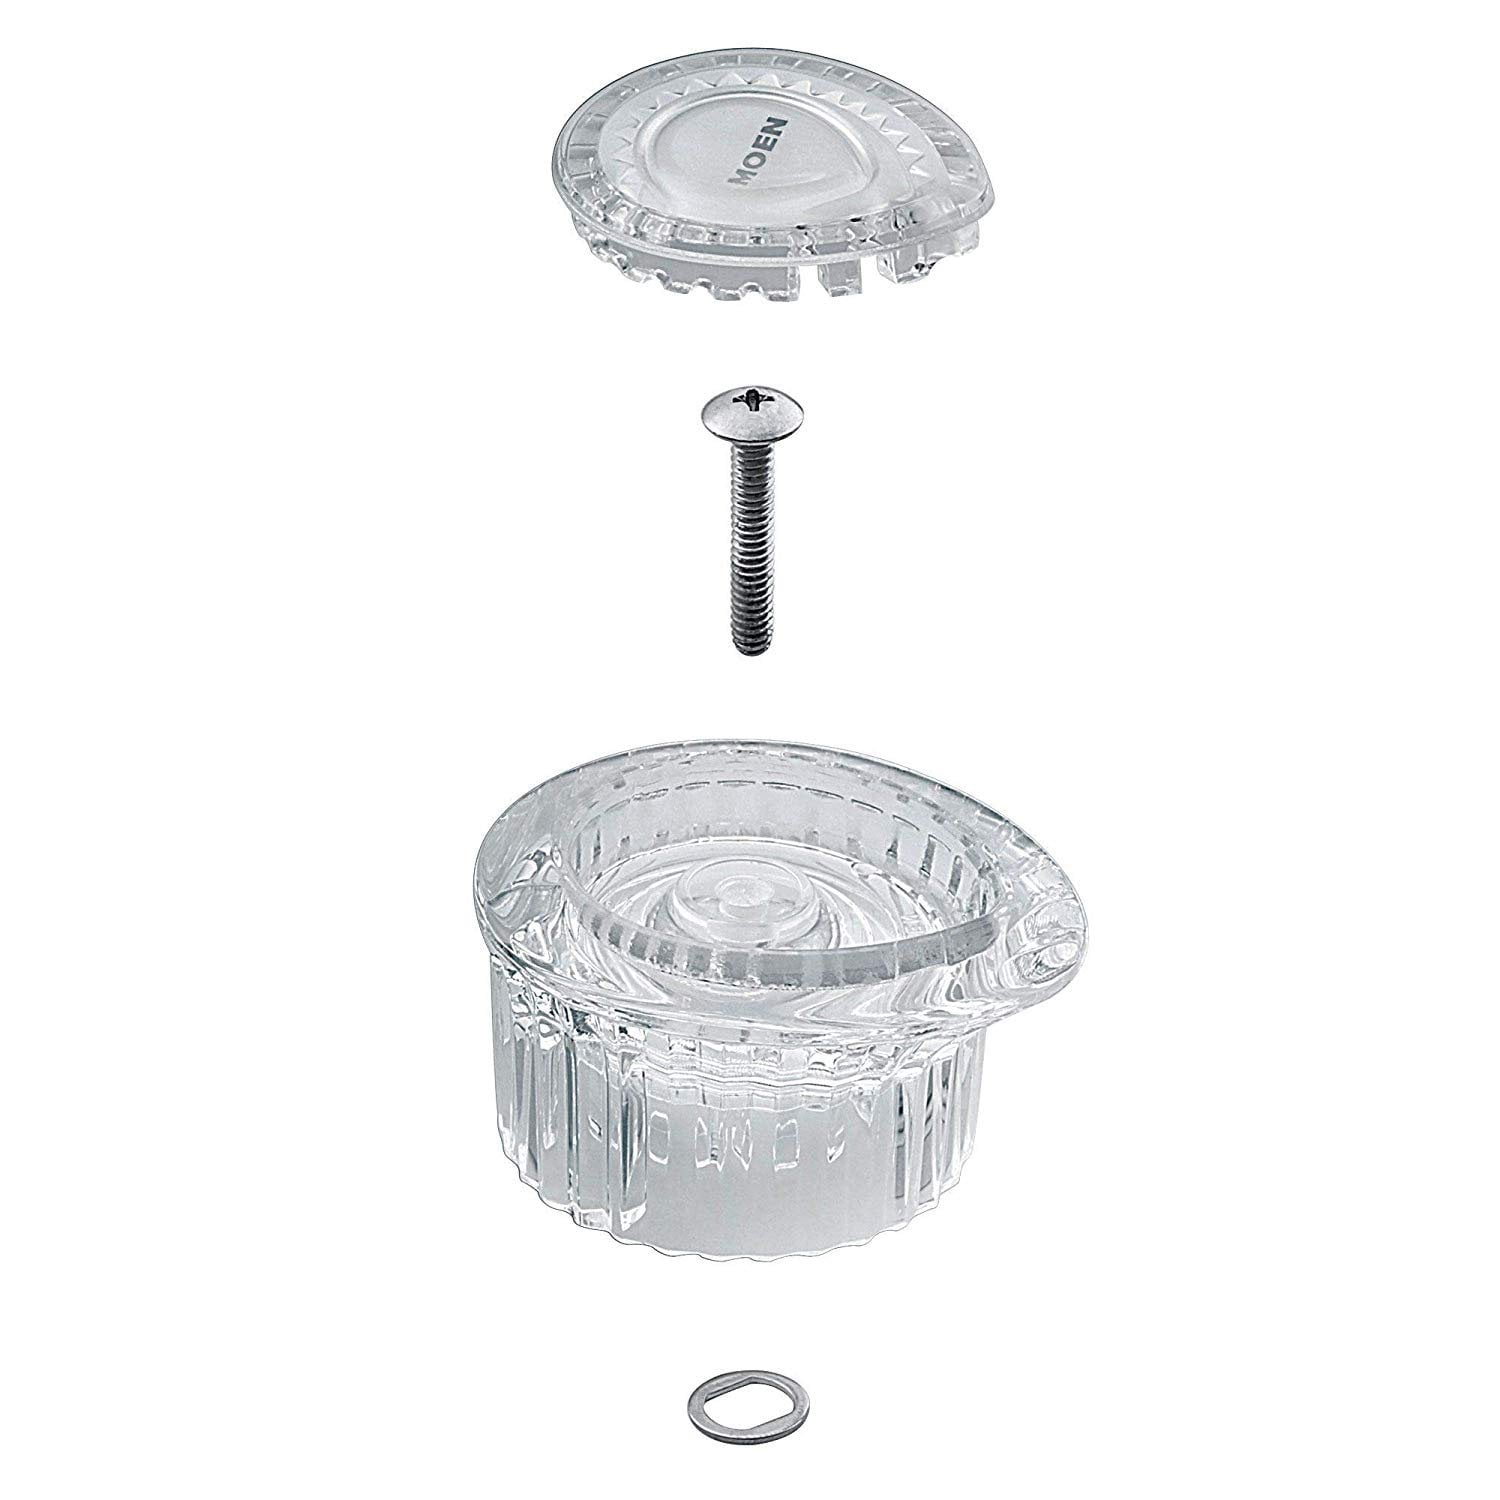 Moen 100710 Posi-Temp One-Handle Tub and Shower Knob Handle Kit with White and Chrome Insert